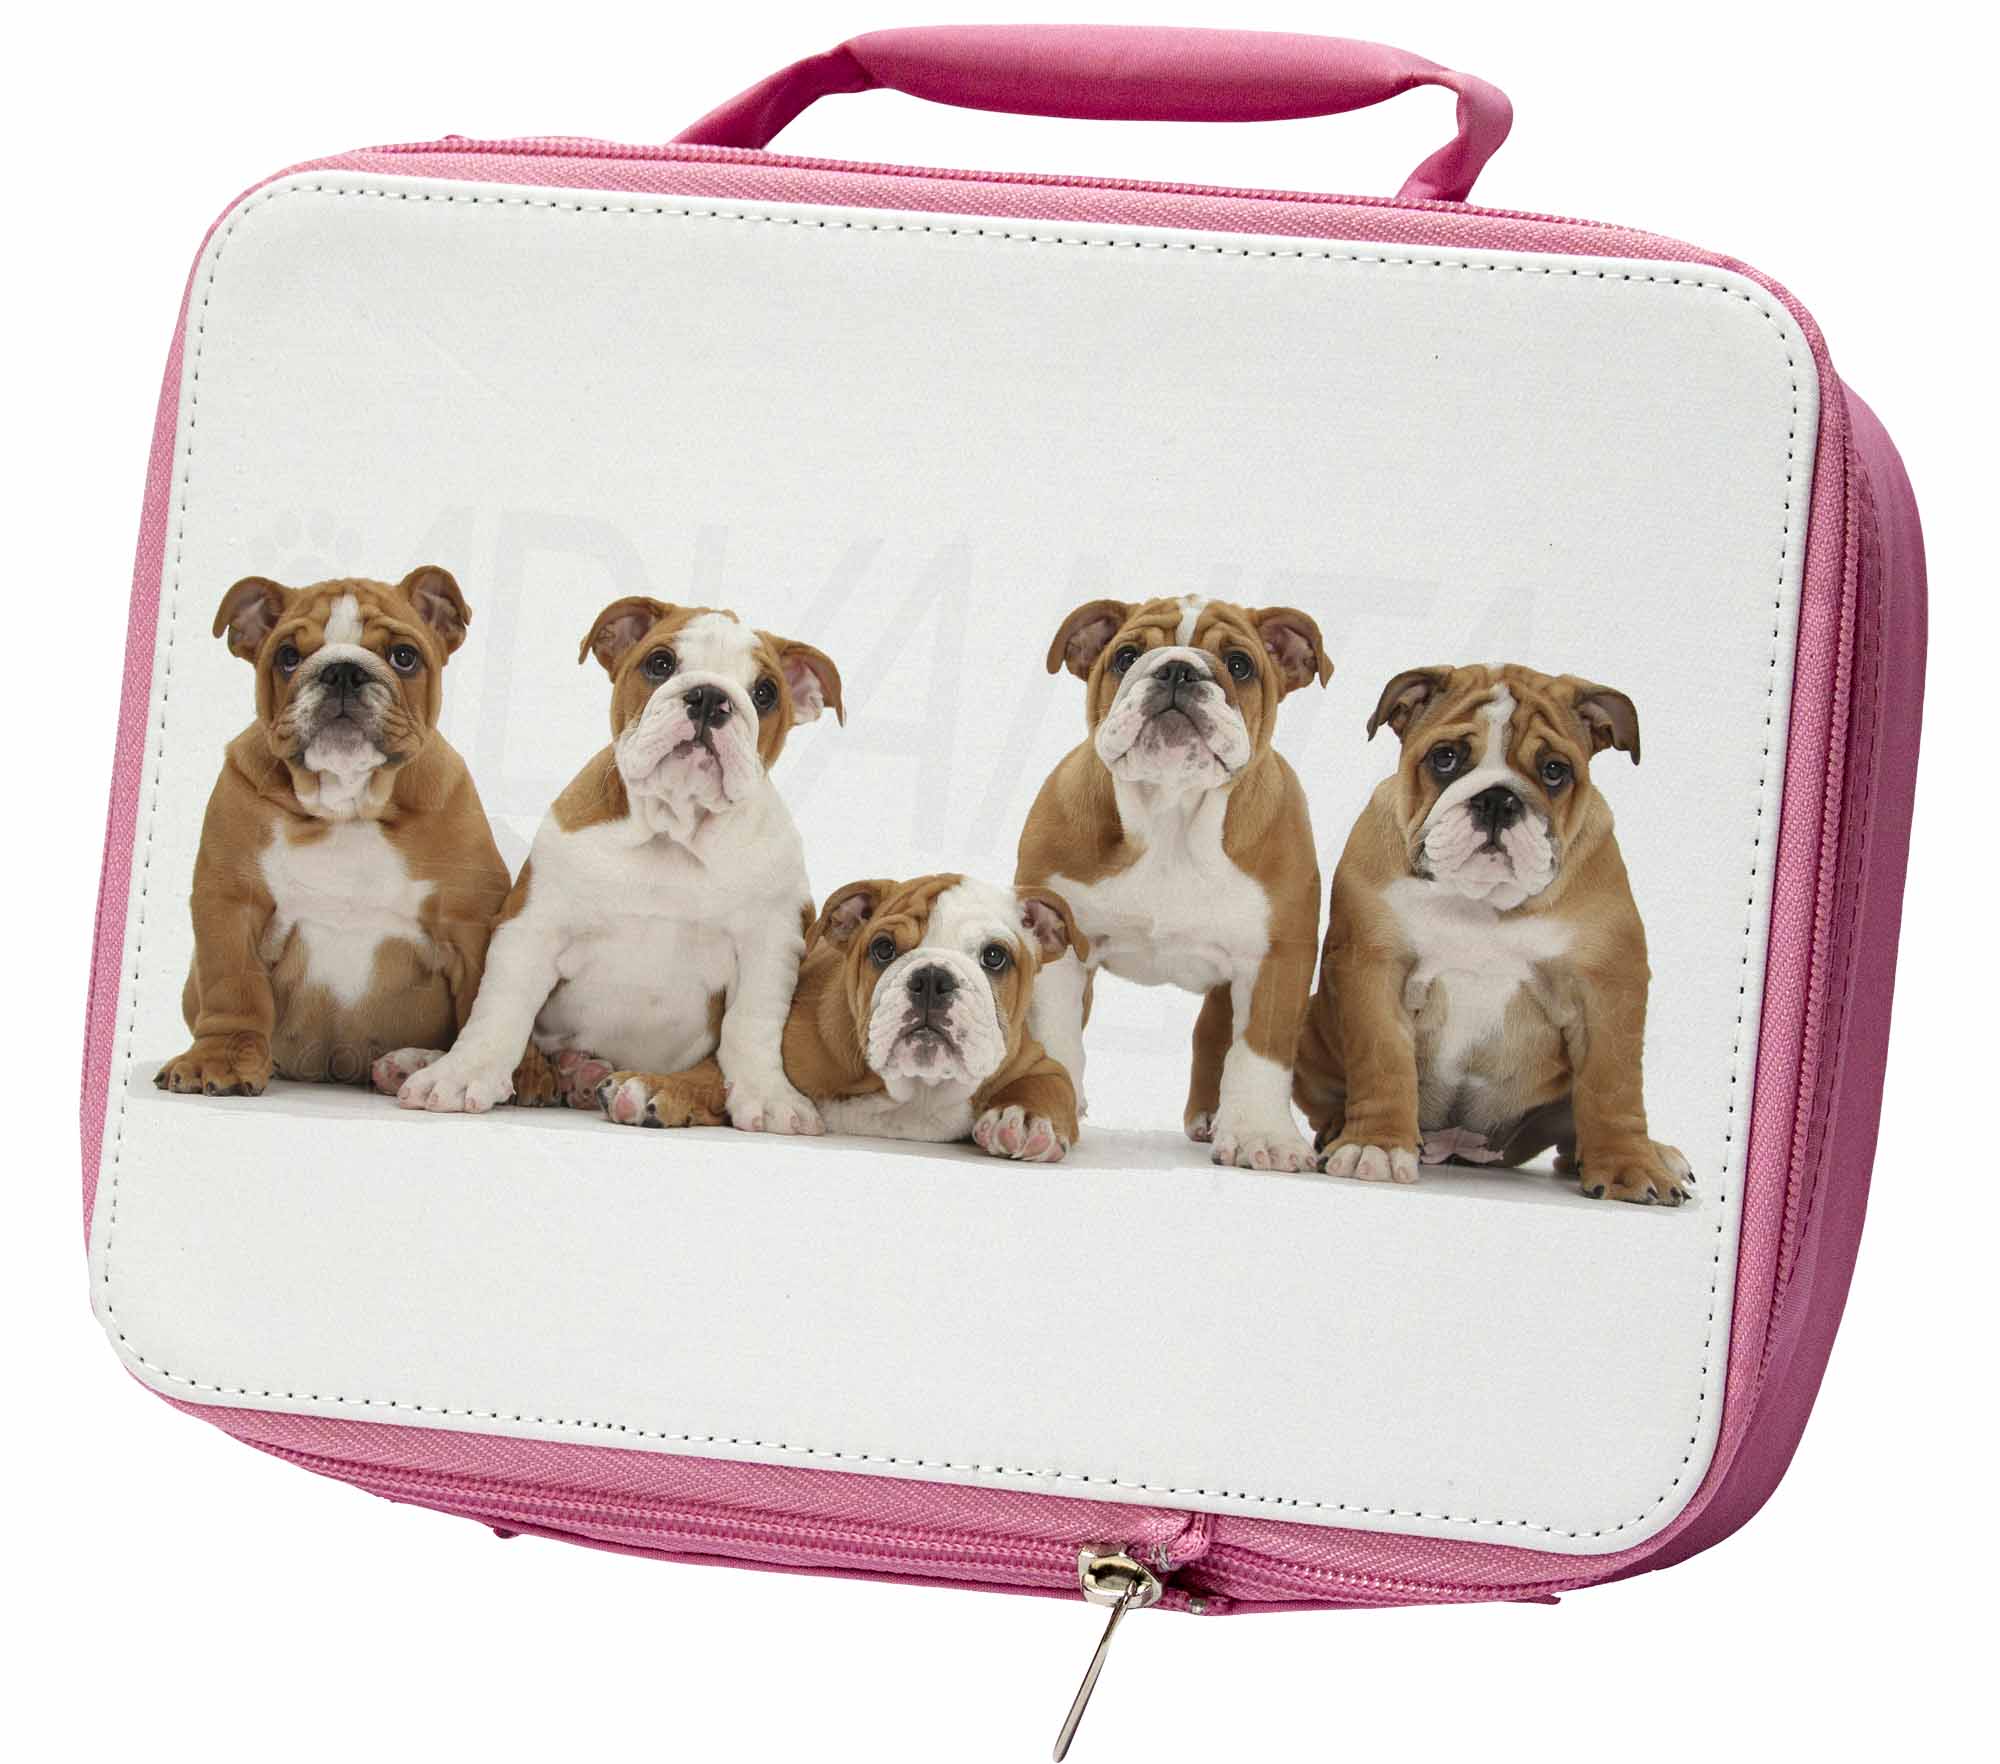 Yorkshire Terrier Dog Insulated Pink School Lunch Box Bag AD-Y4LBP 